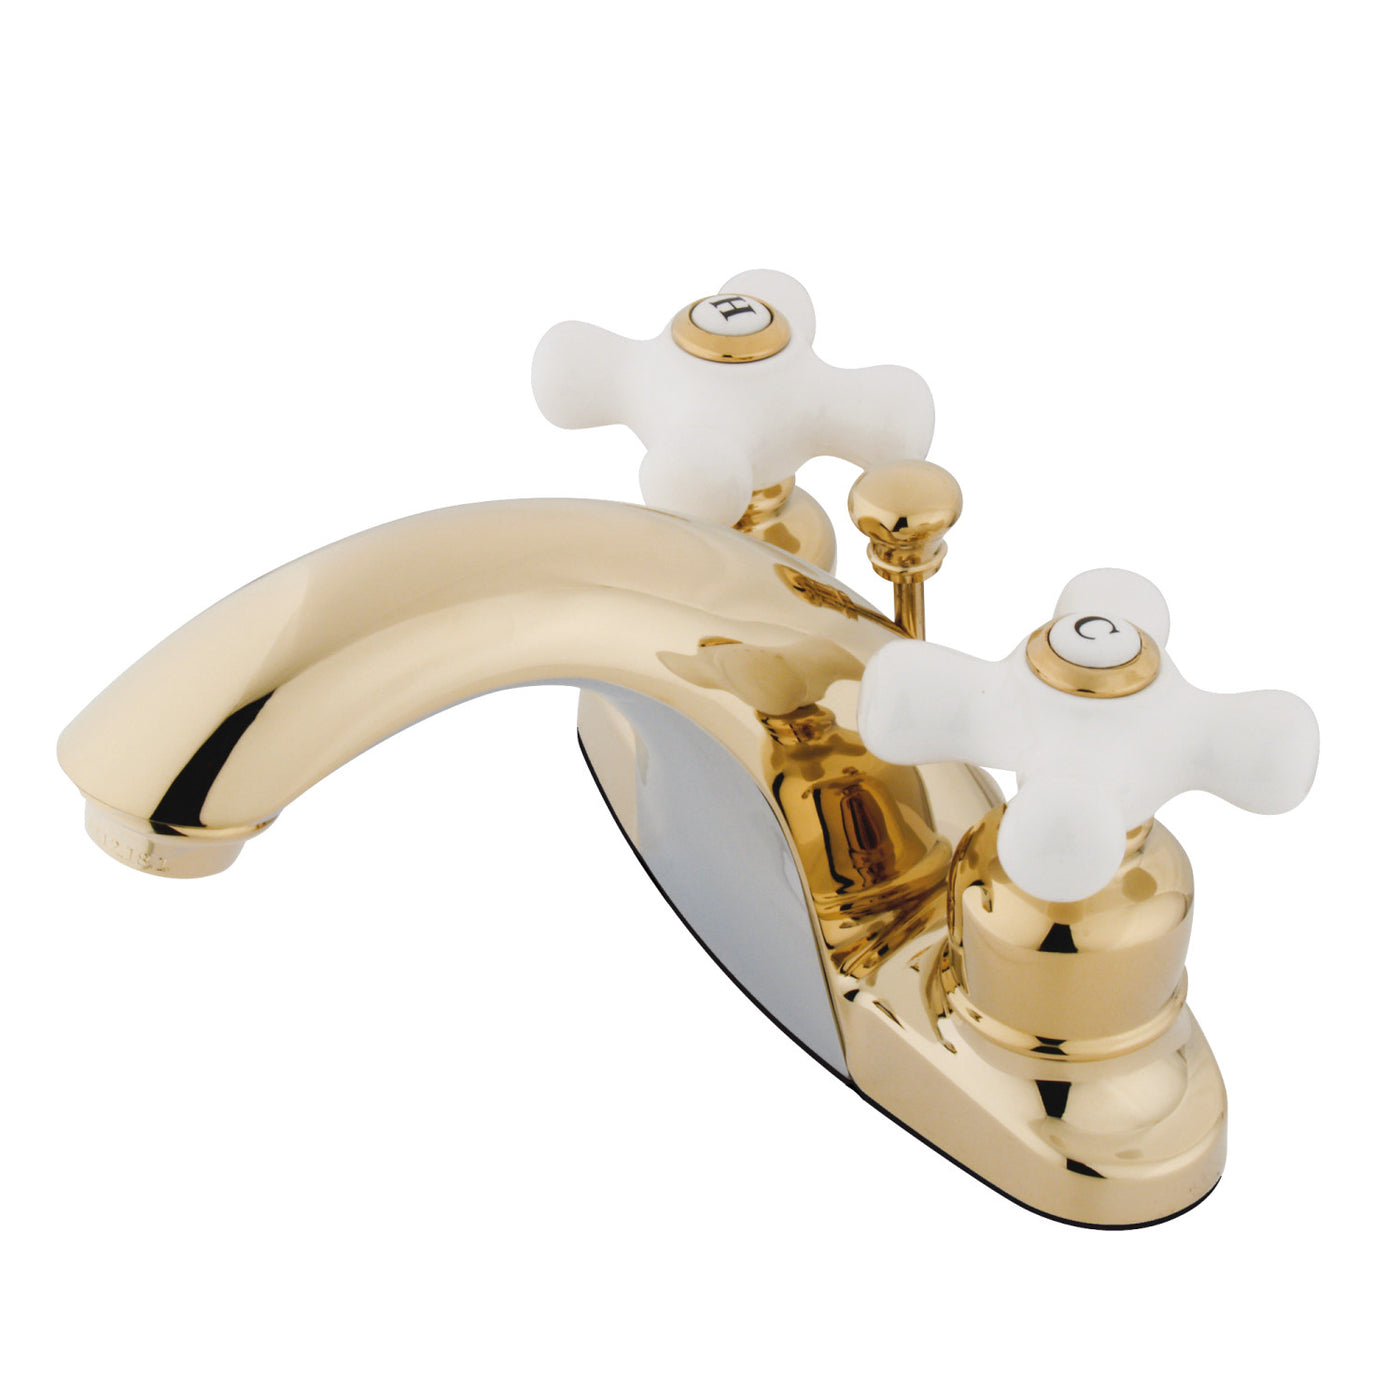 Elements of Design EB7642PX 4-Inch Centerset Bathroom Faucet, Polished Brass